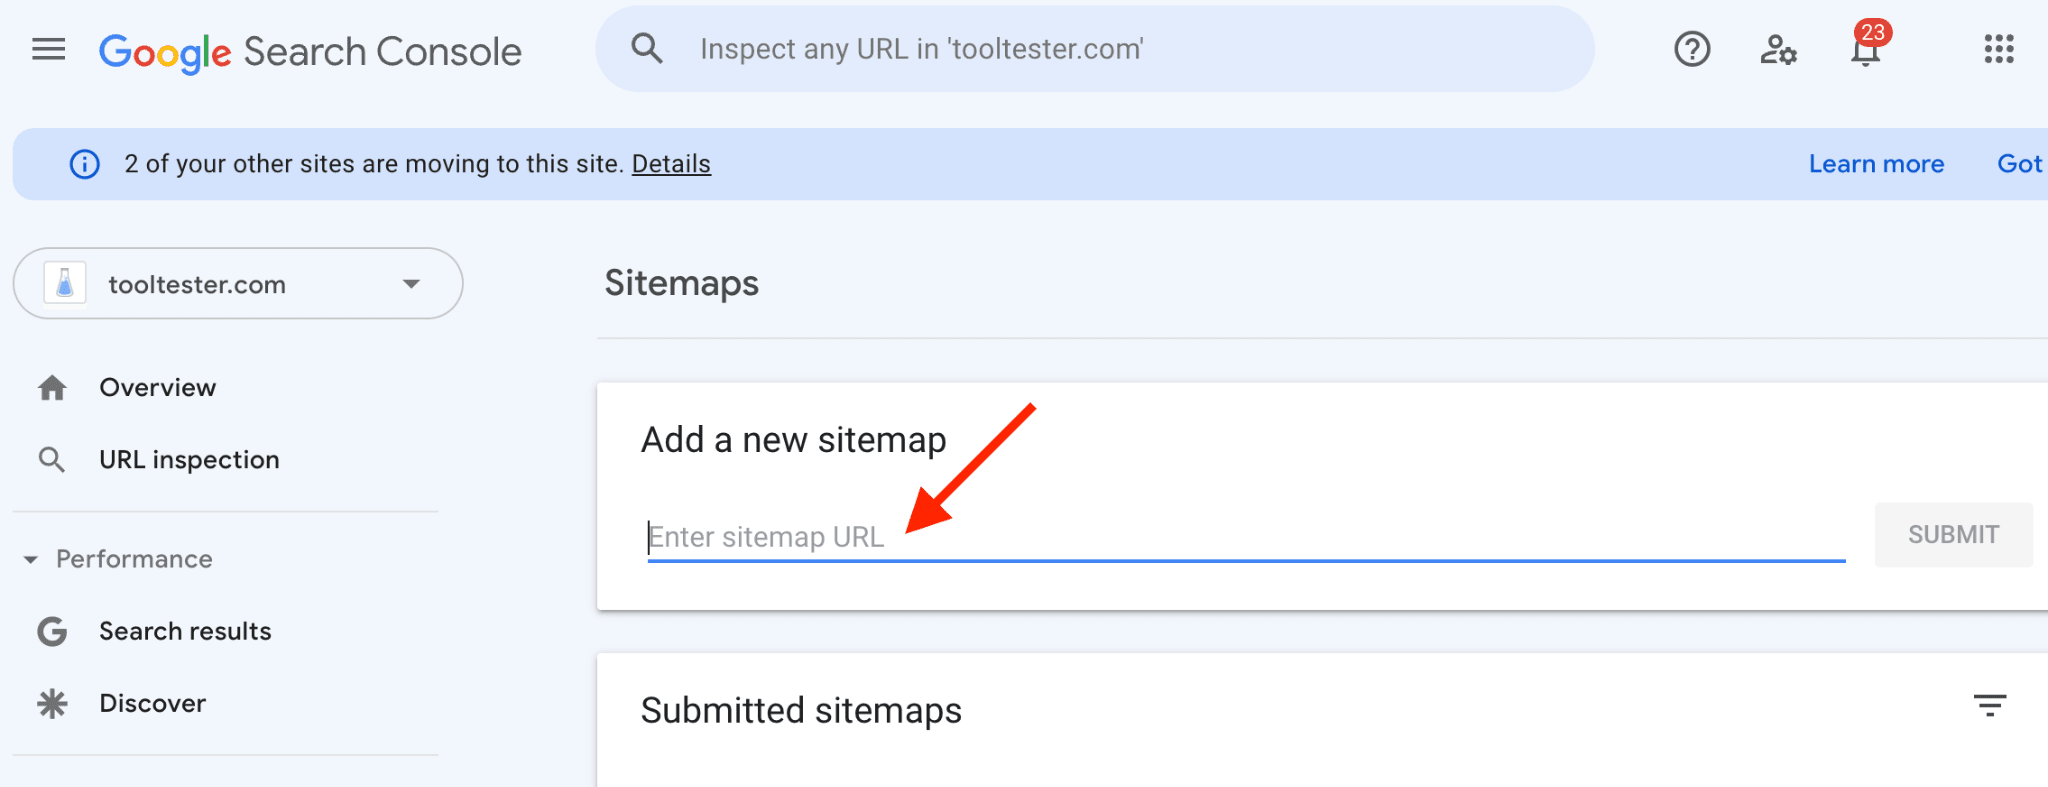 Submitting a Sitemap to Google